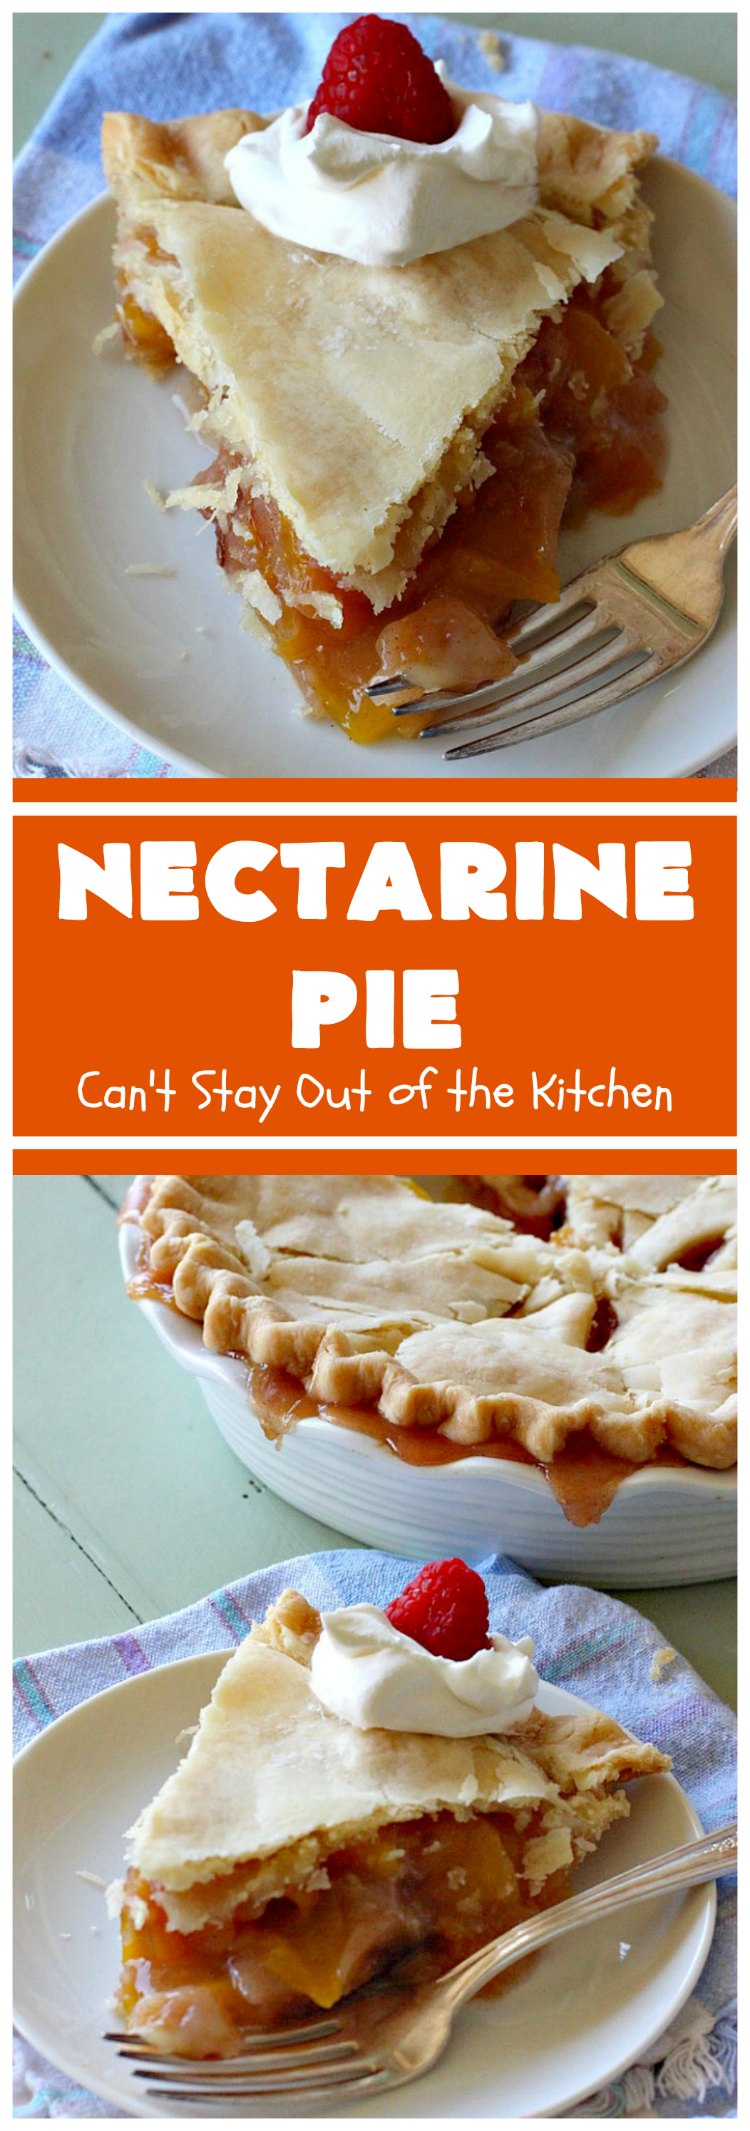 Nectarine Pie | Can't Stay Out of the Kitchen